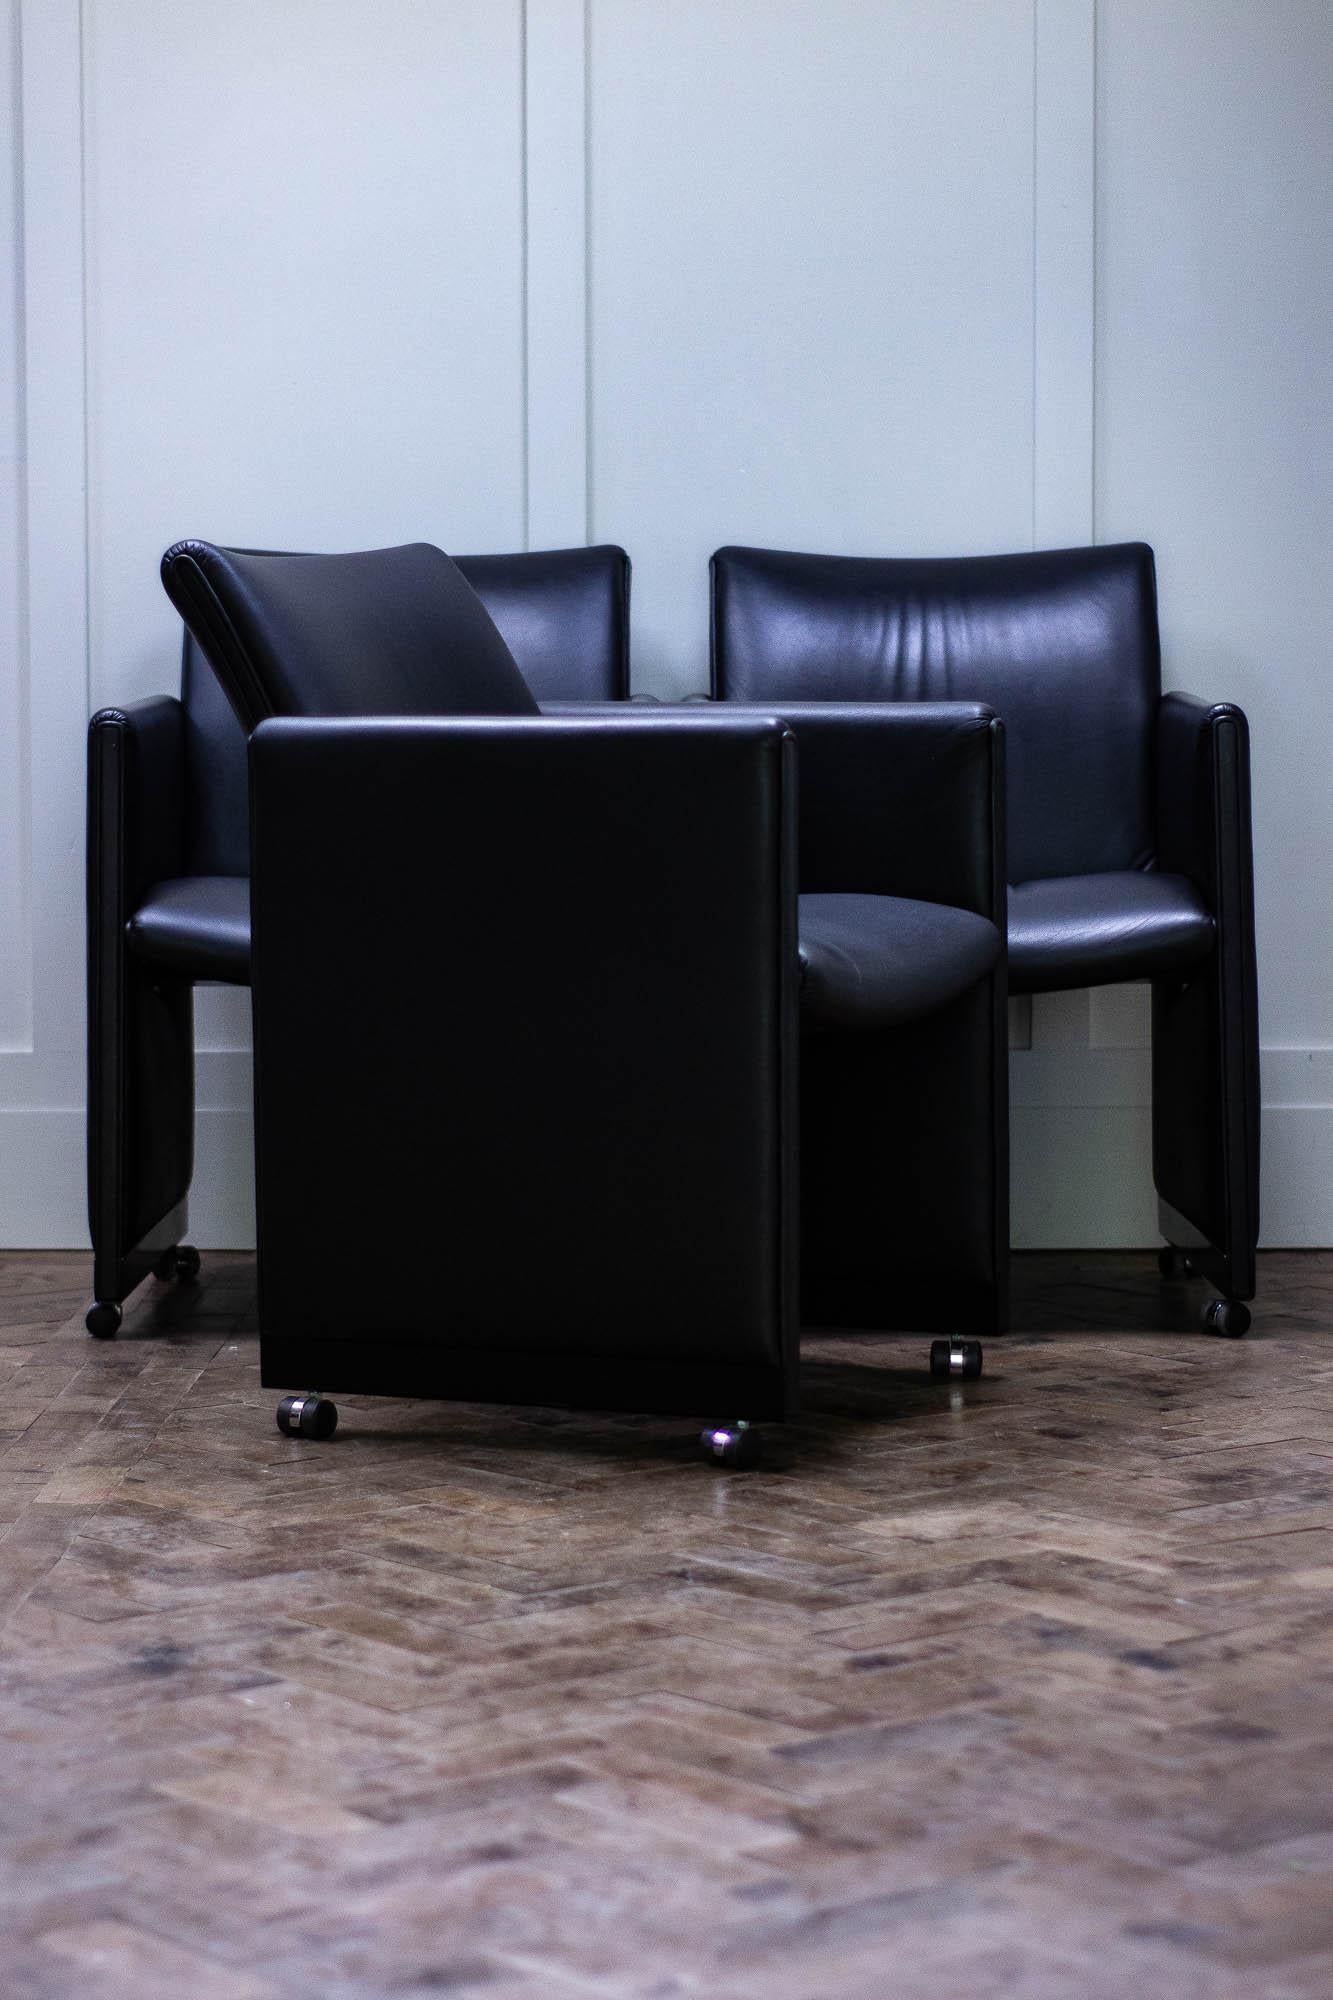 Three black leather chairs available by Geoffrey Harcourt for Dutch manufacturer Artifort.

The chairs are on casters and date from the 1980s. 

One chair has some small damage, which is shown in the images. 

Height 85cm
Seat Height 48cm
Width